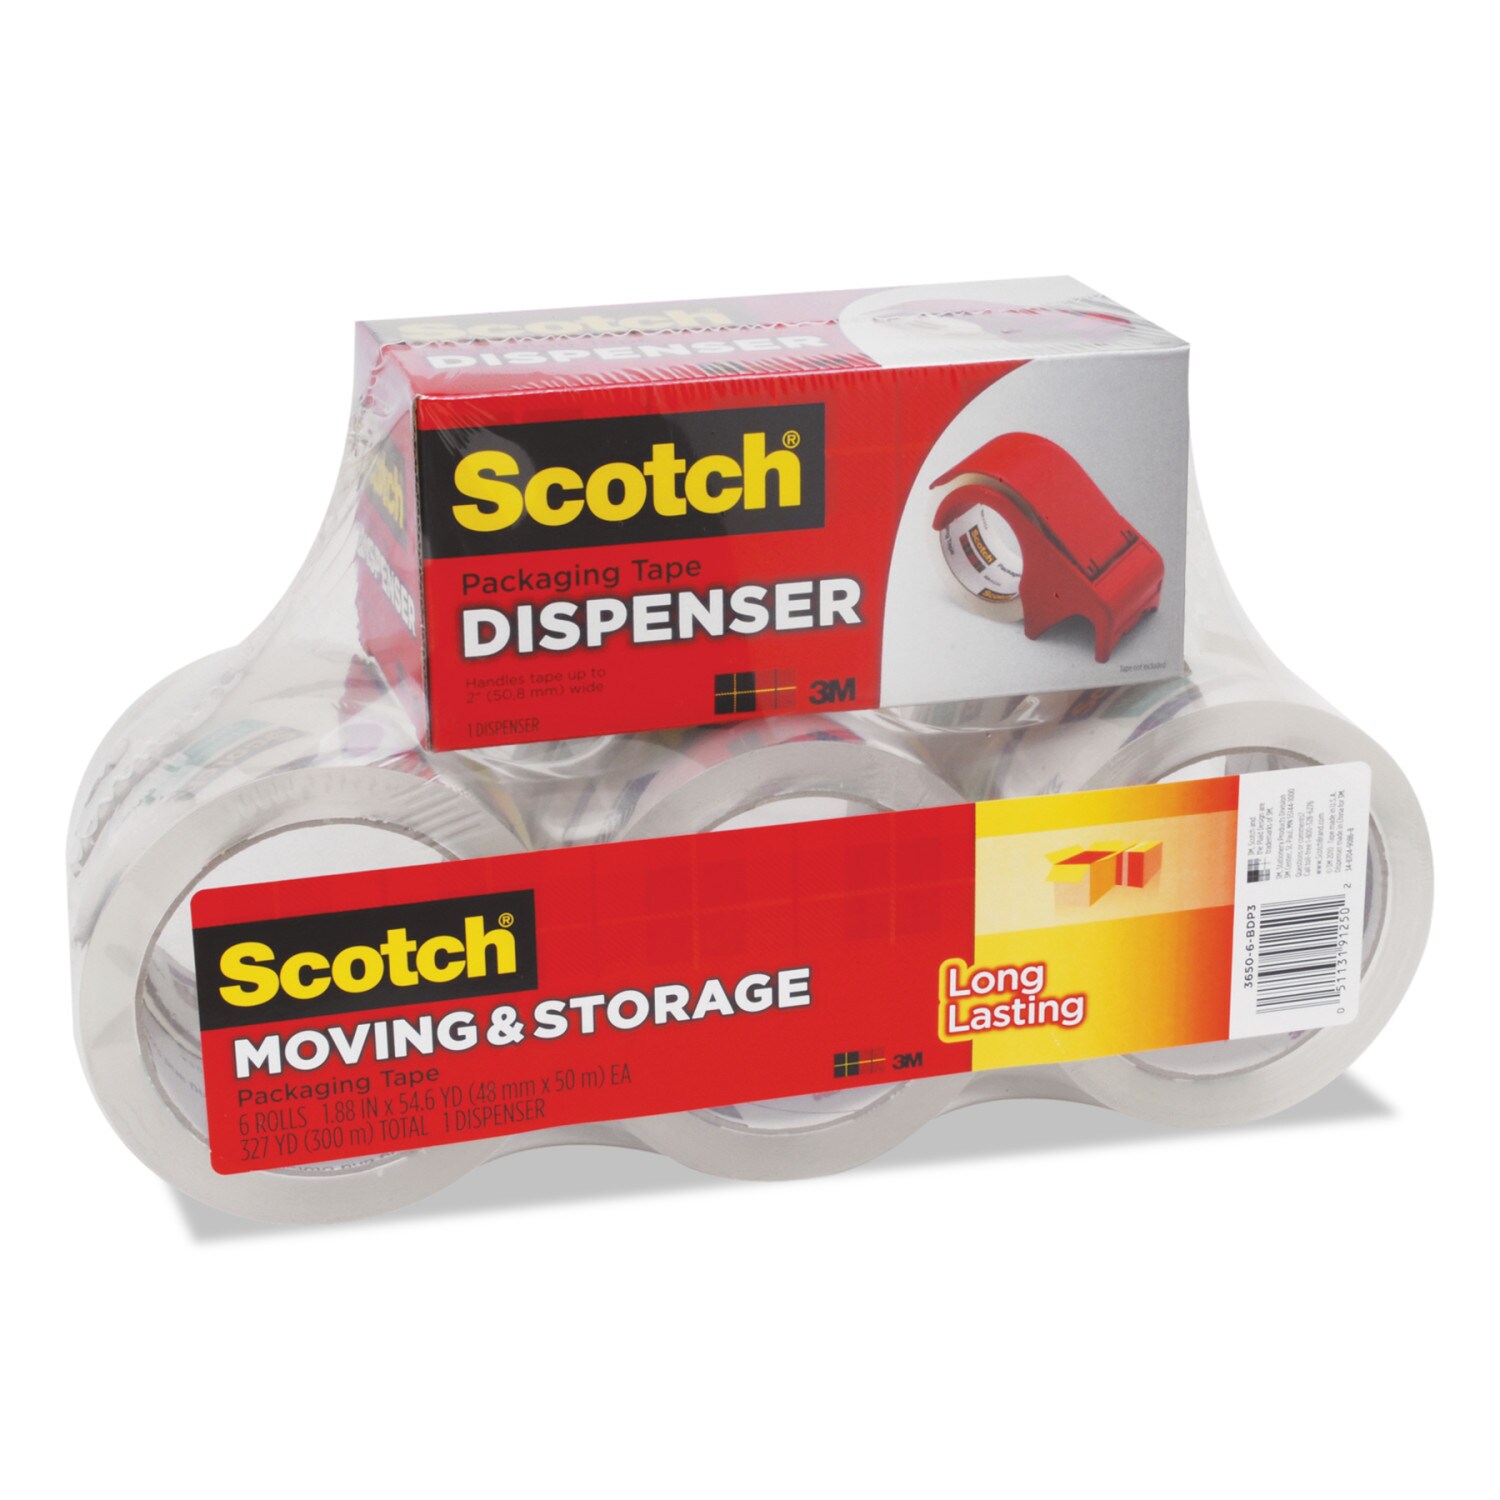 Ea New 8 Rolls Heavy Duty 3M Scotch Shipping Packaging Tape Made in USA 54.6YD